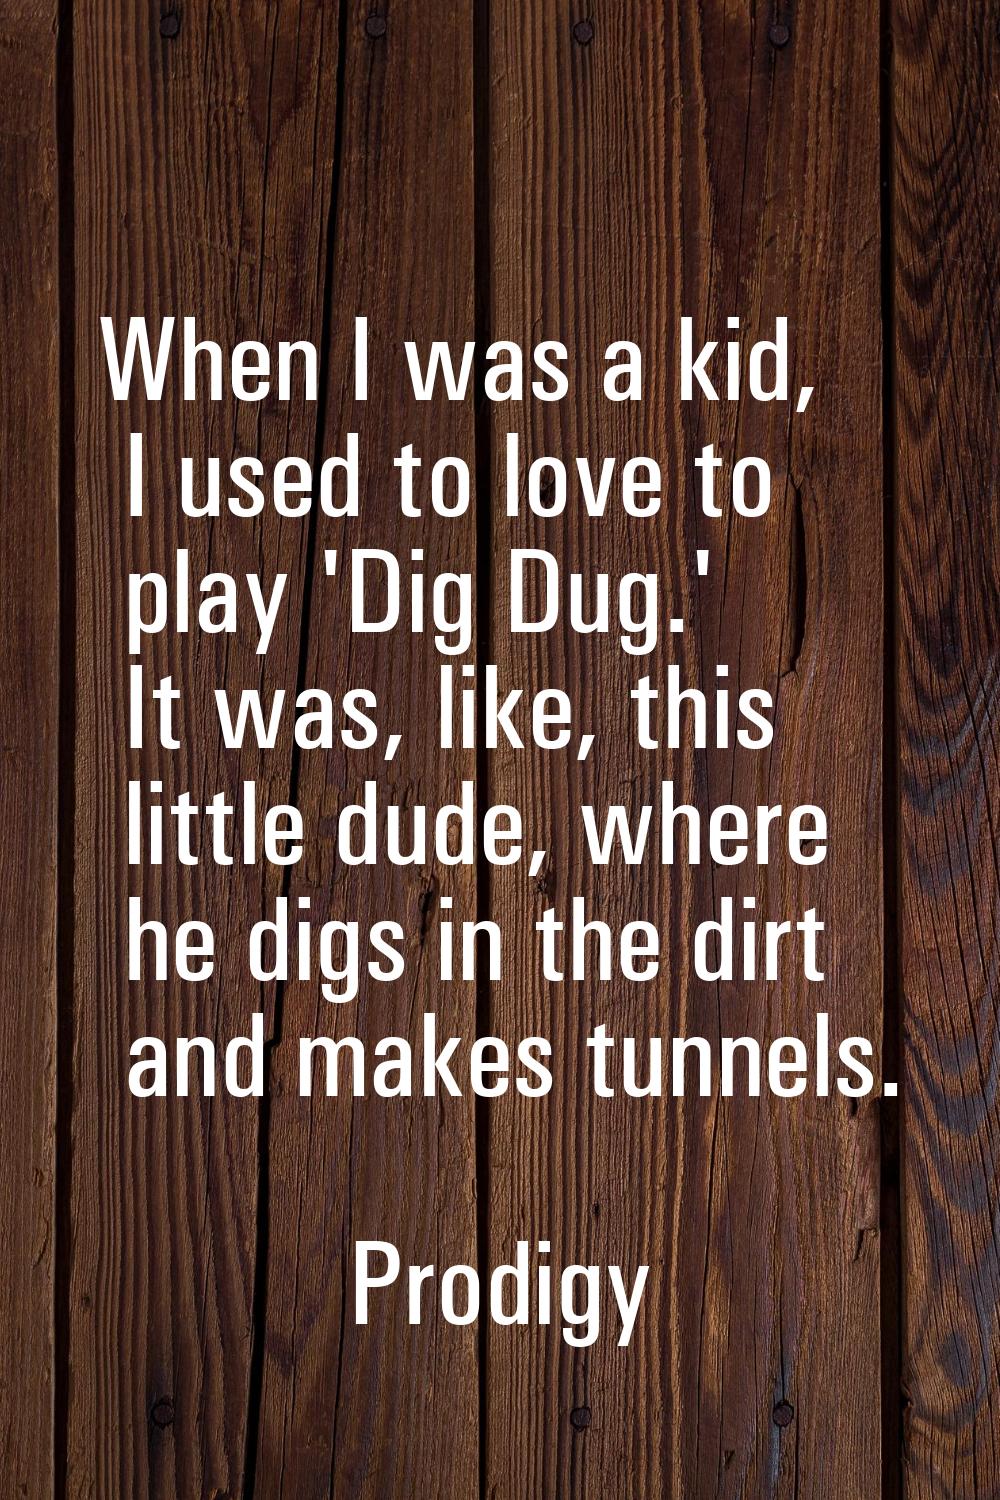 When I was a kid, I used to love to play 'Dig Dug.' It was, like, this little dude, where he digs i